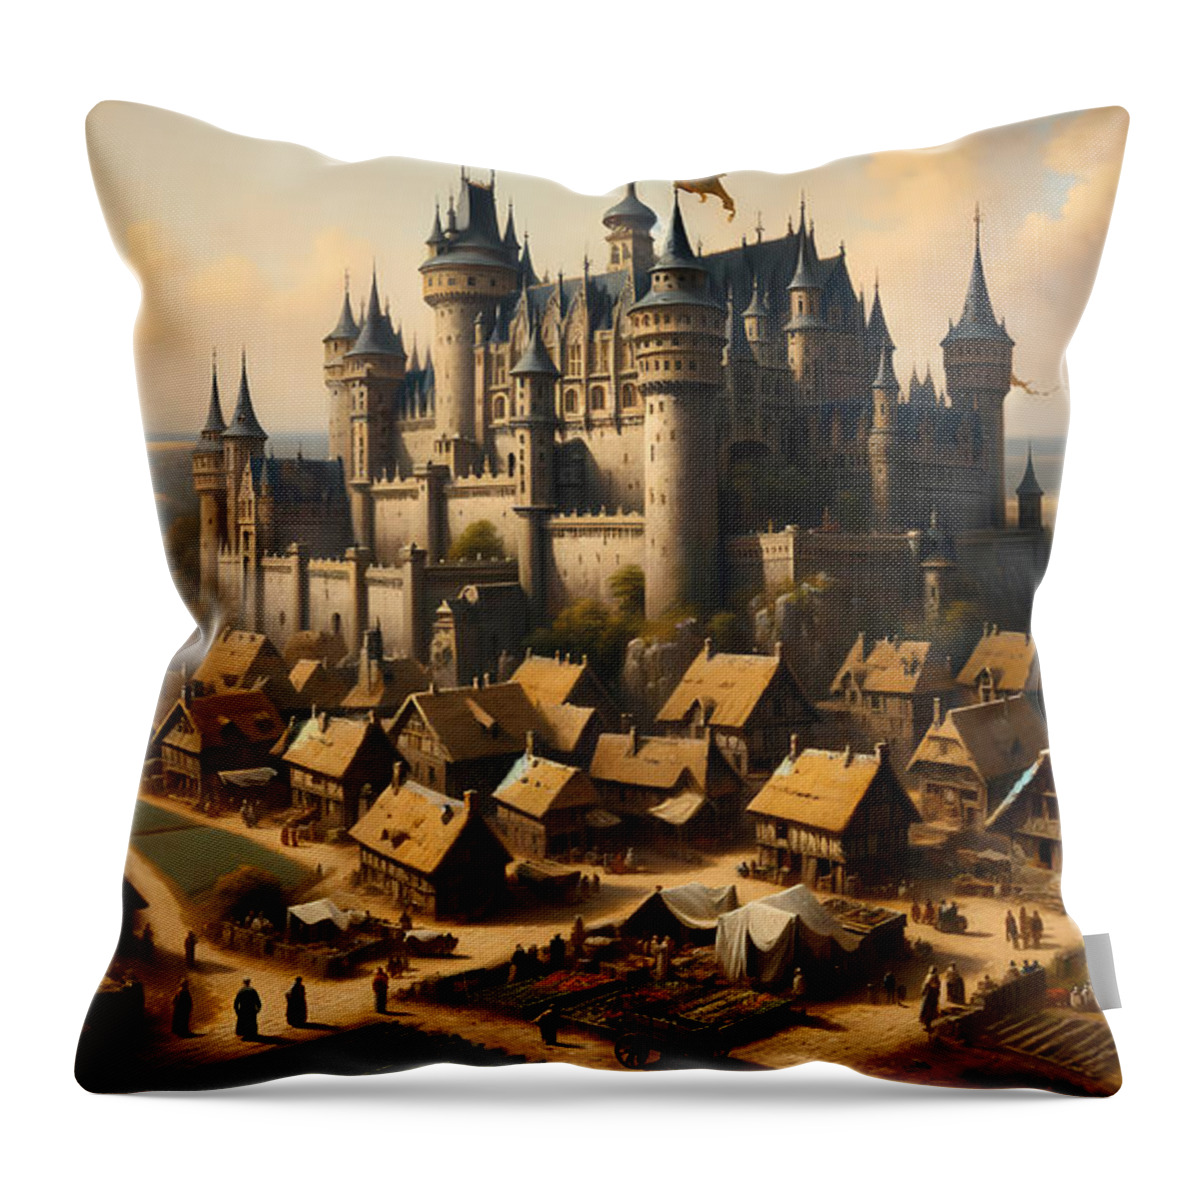 Grand Throw Pillow featuring the painting A grand castle perched on a hilltop overlooking a medieval village by Jeff Creation